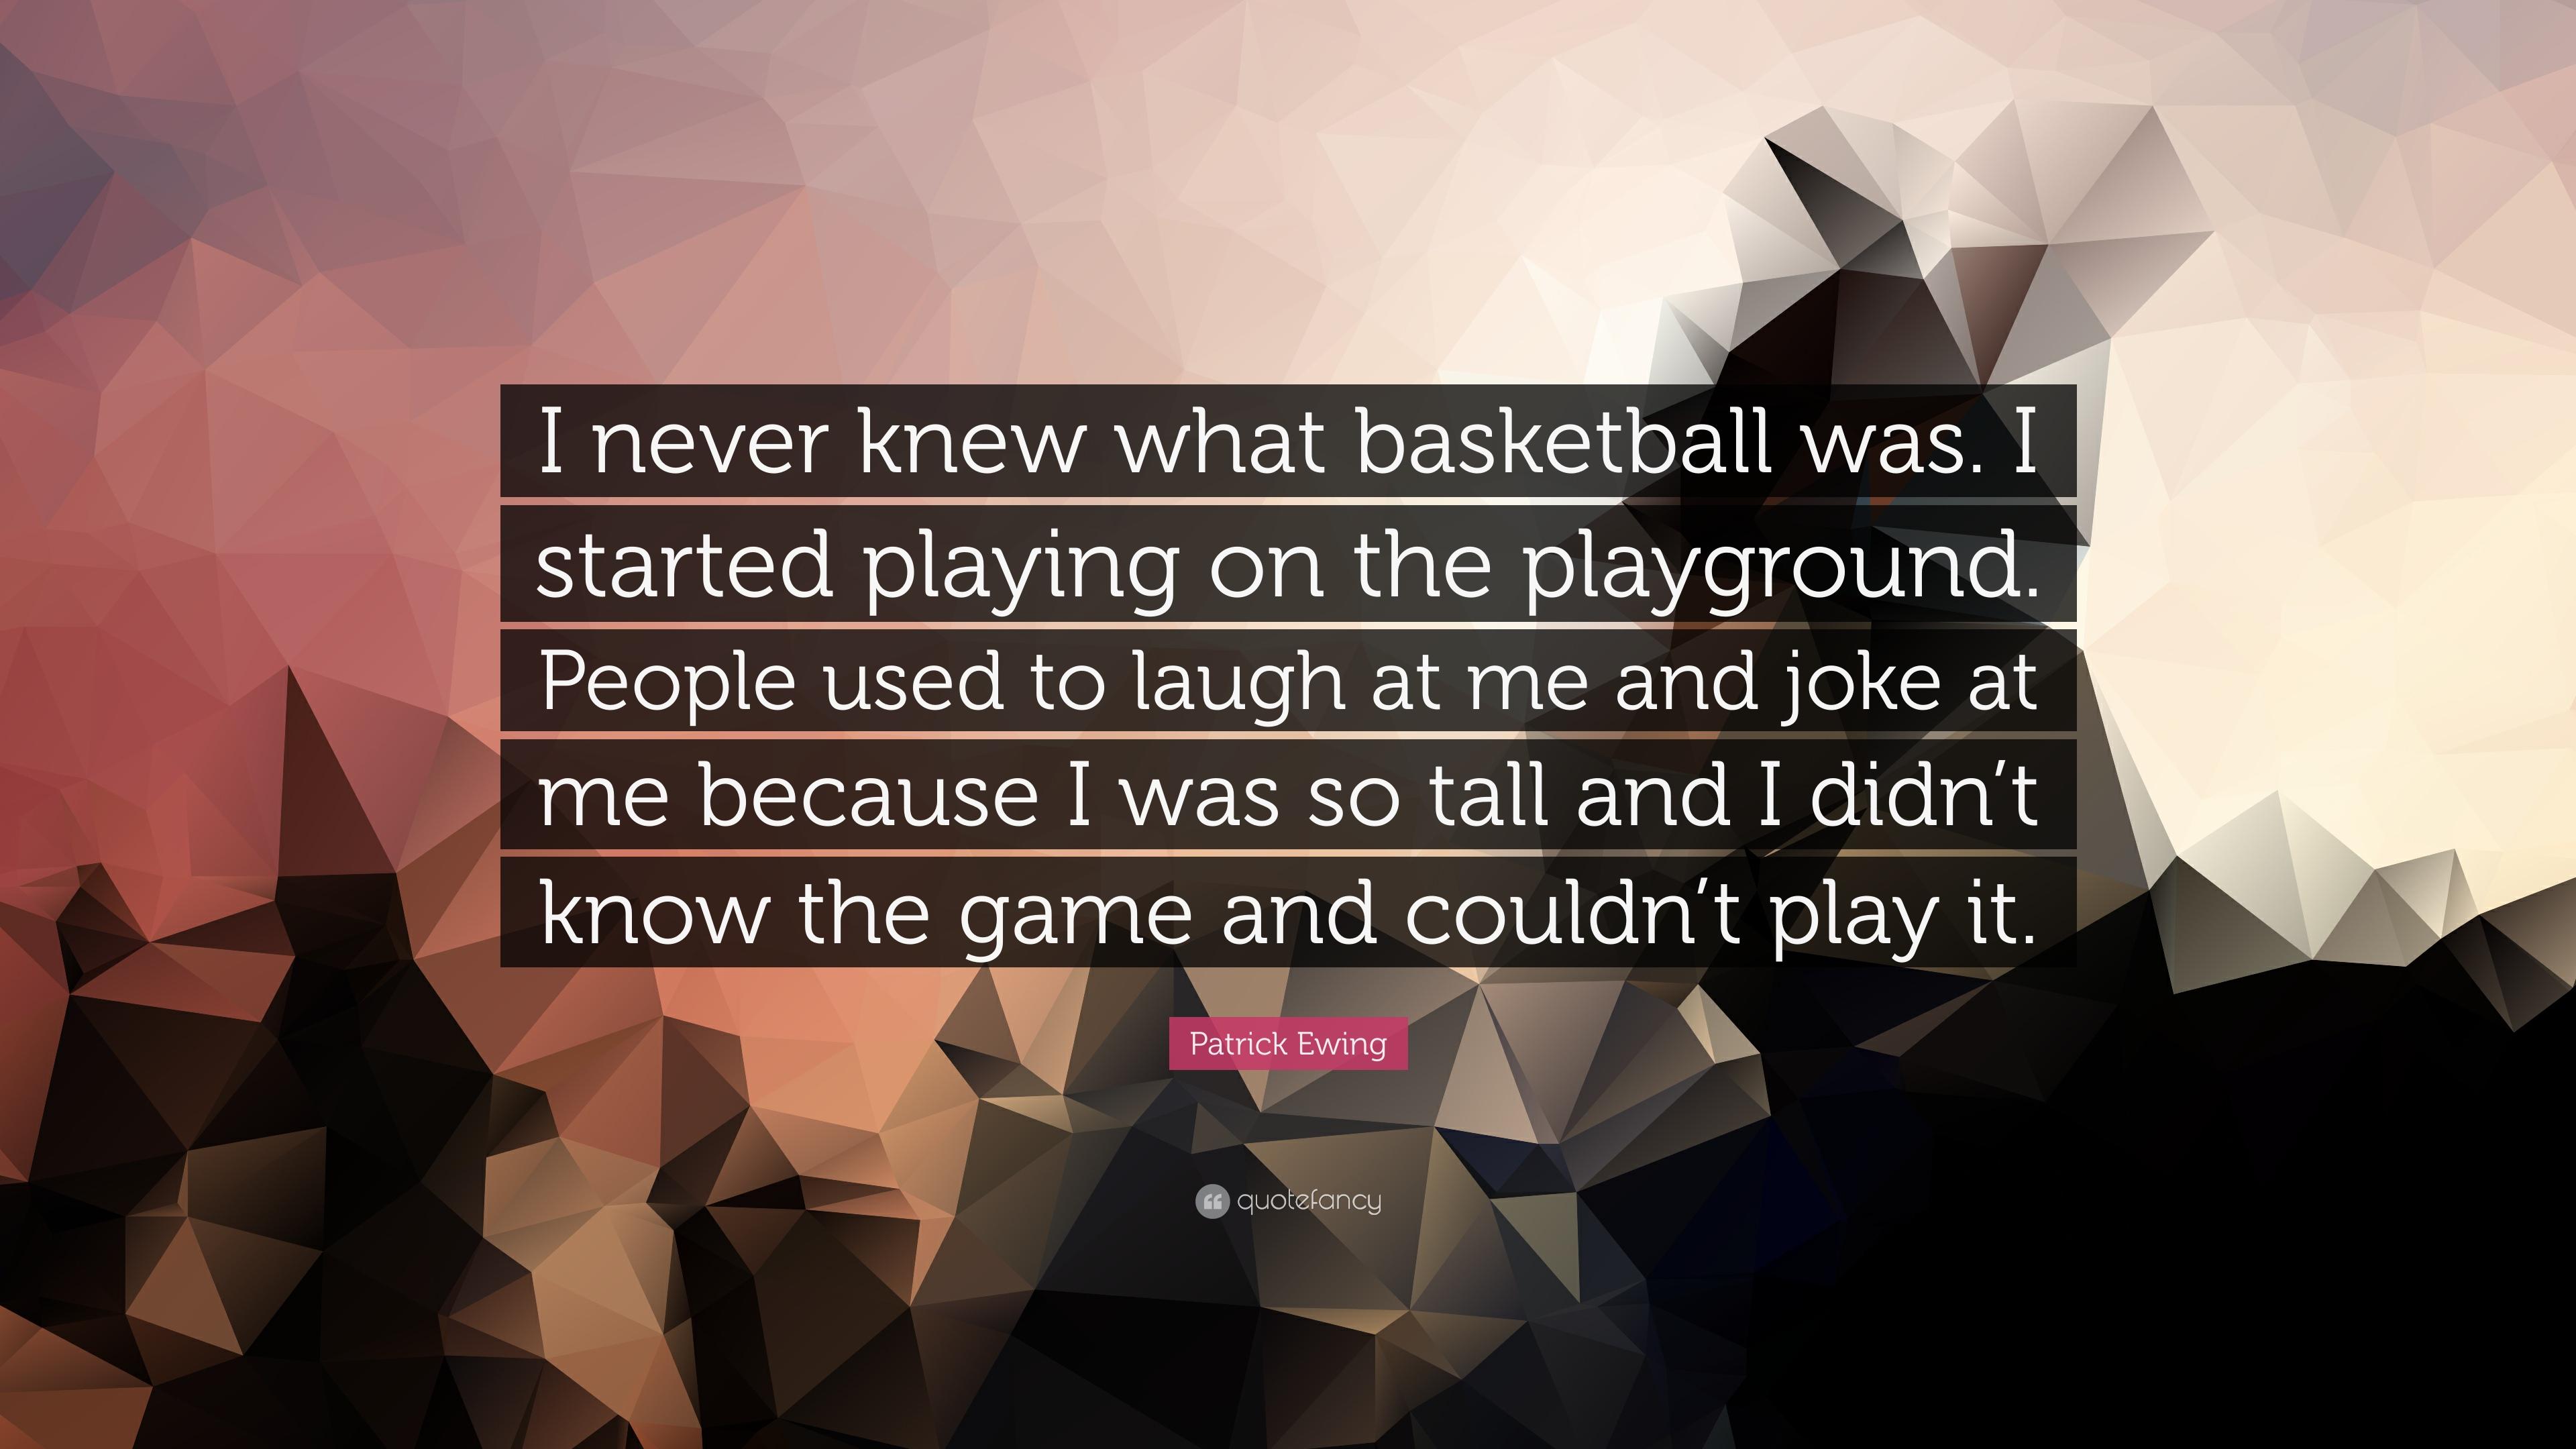 Patrick Ewing Quote: “I never knew what basketball was. I started